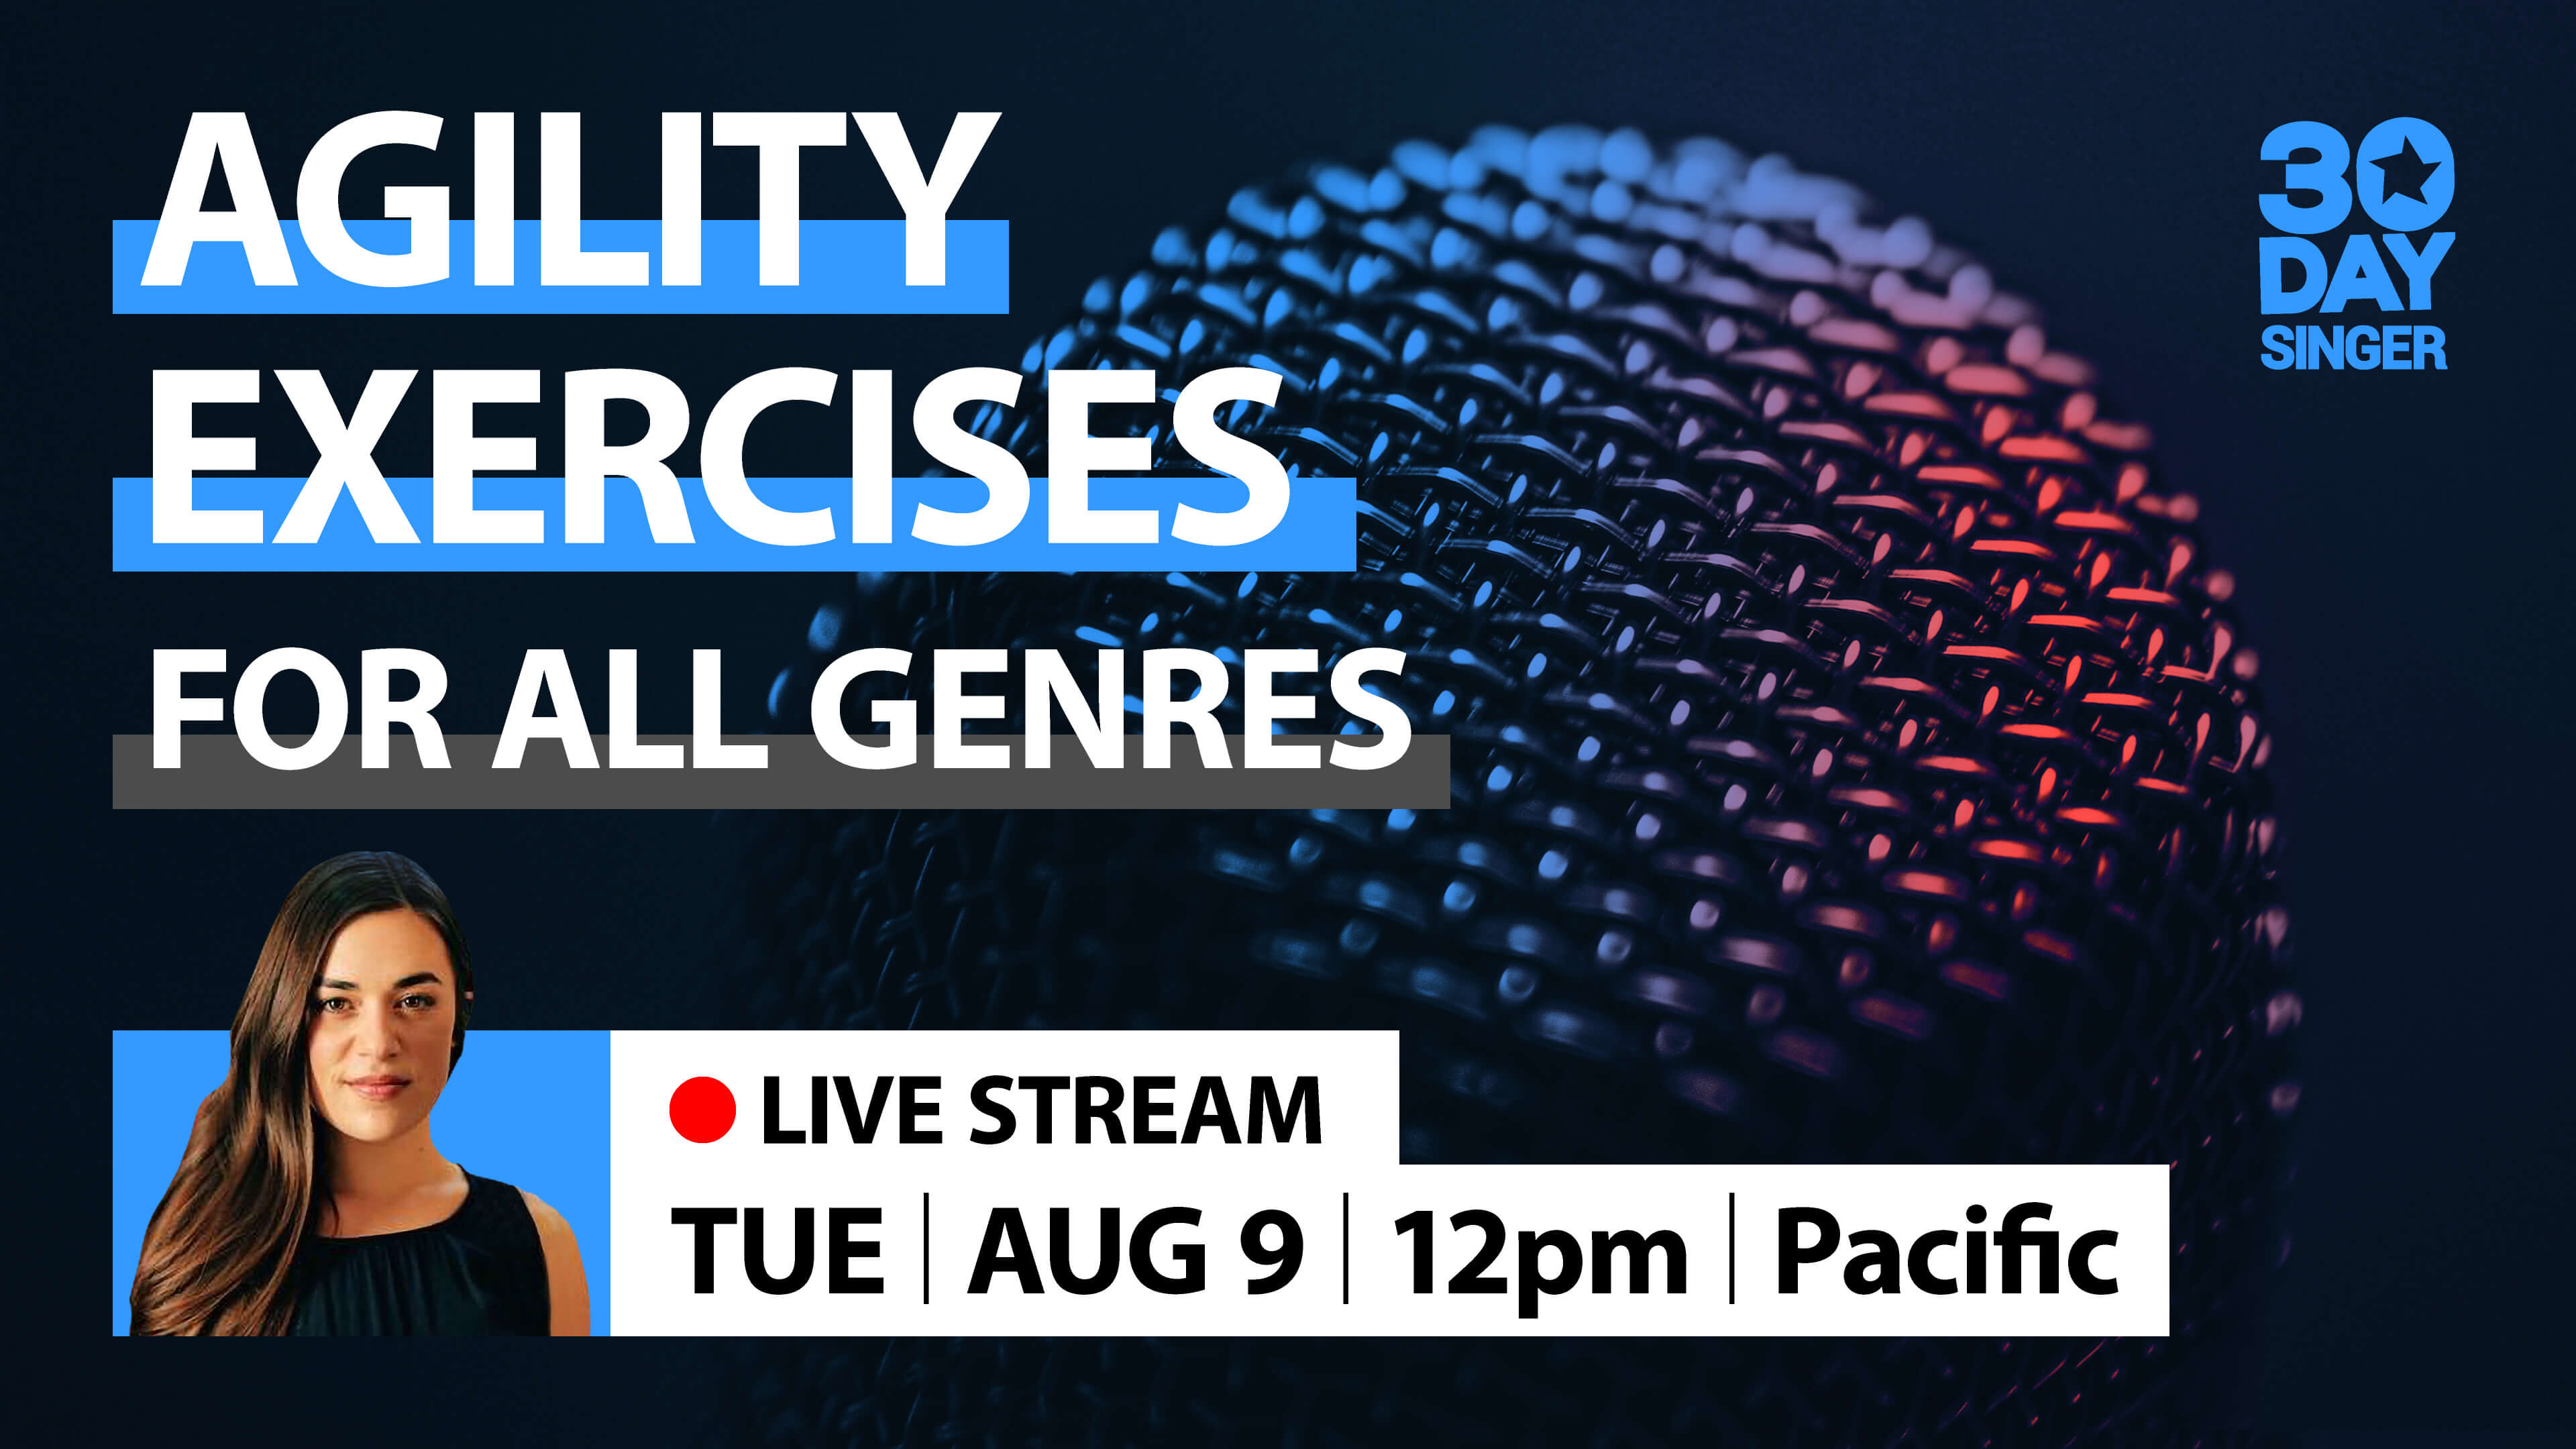 Agility Exercises For All Genres